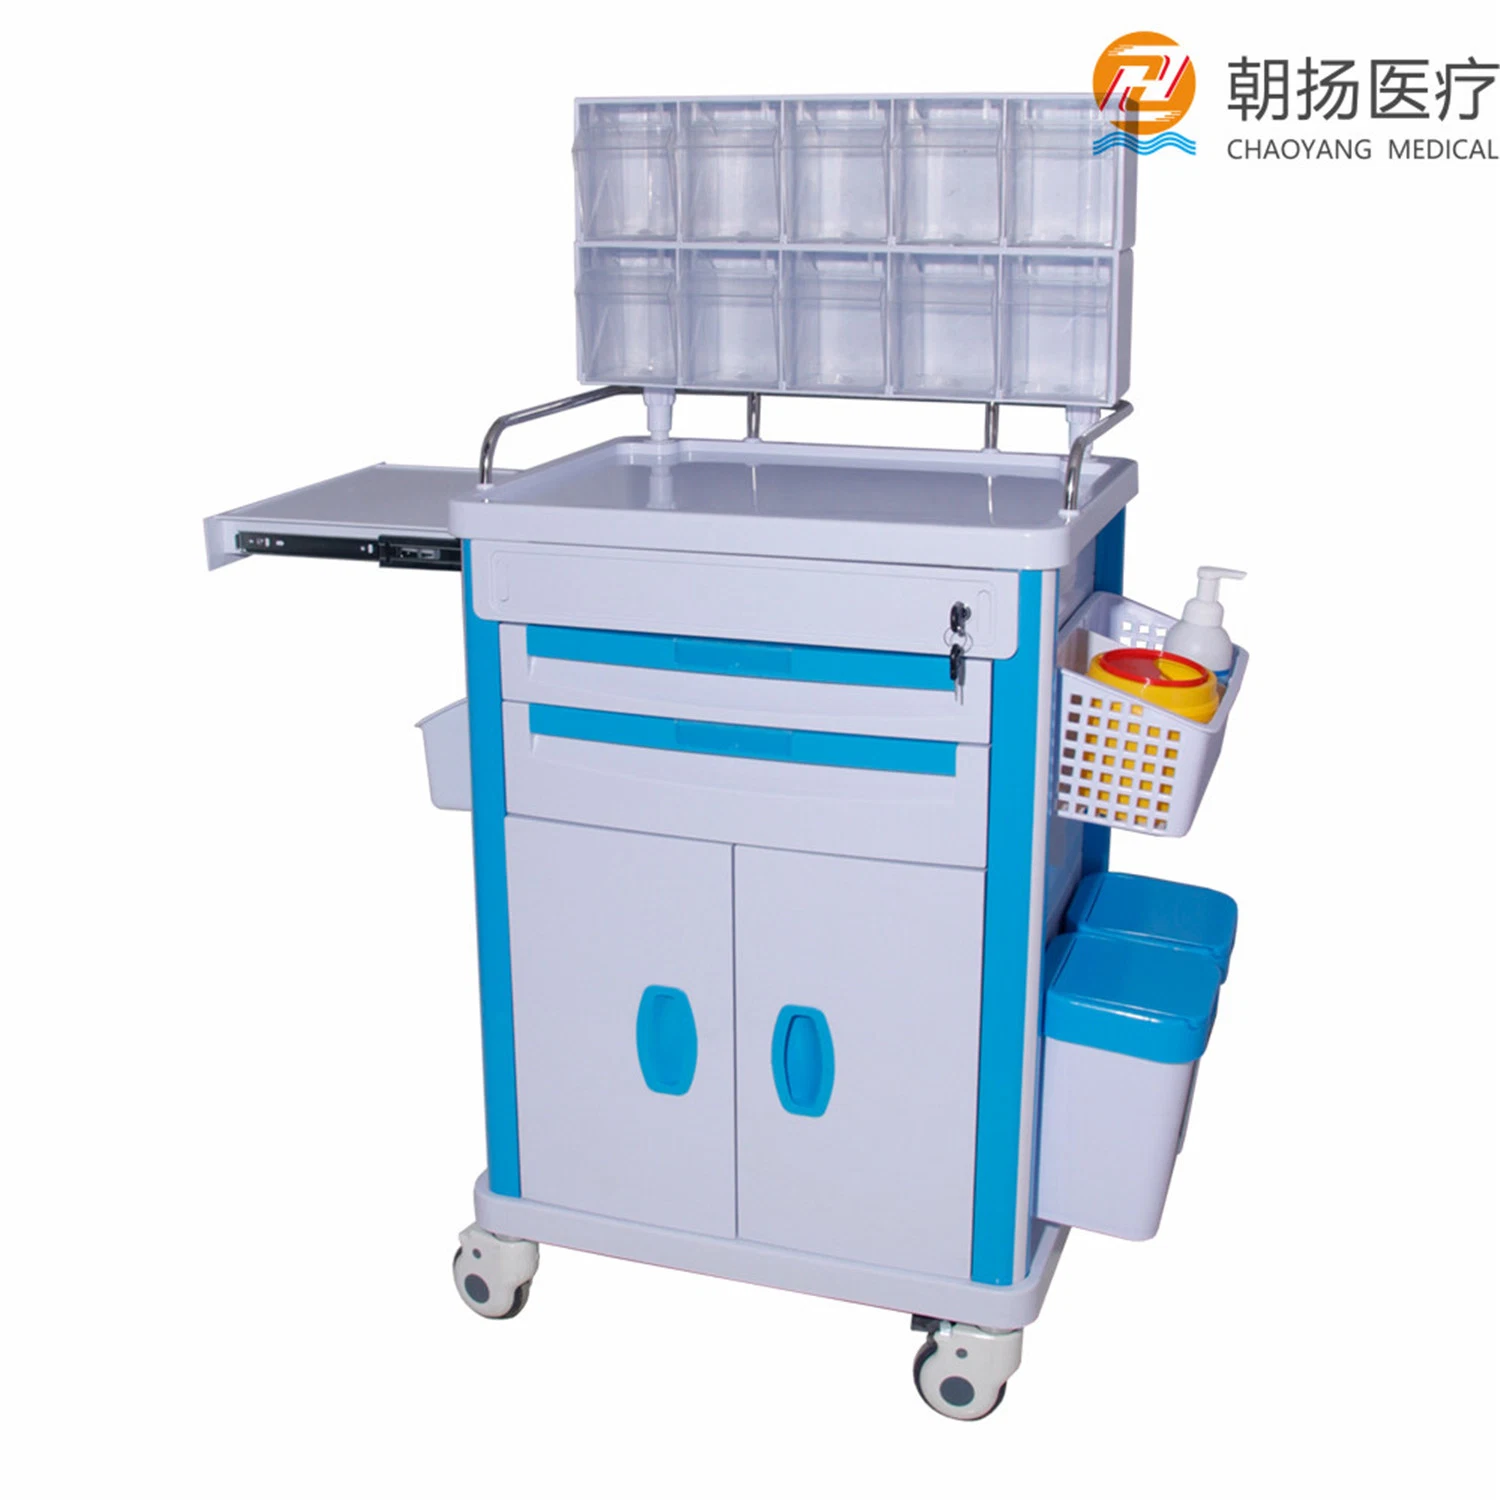 Hospital Carts Medical Crash Cart Emergency Trolley ABS Plastic Anesthesia Trolley with Drawers Cy-D414A2